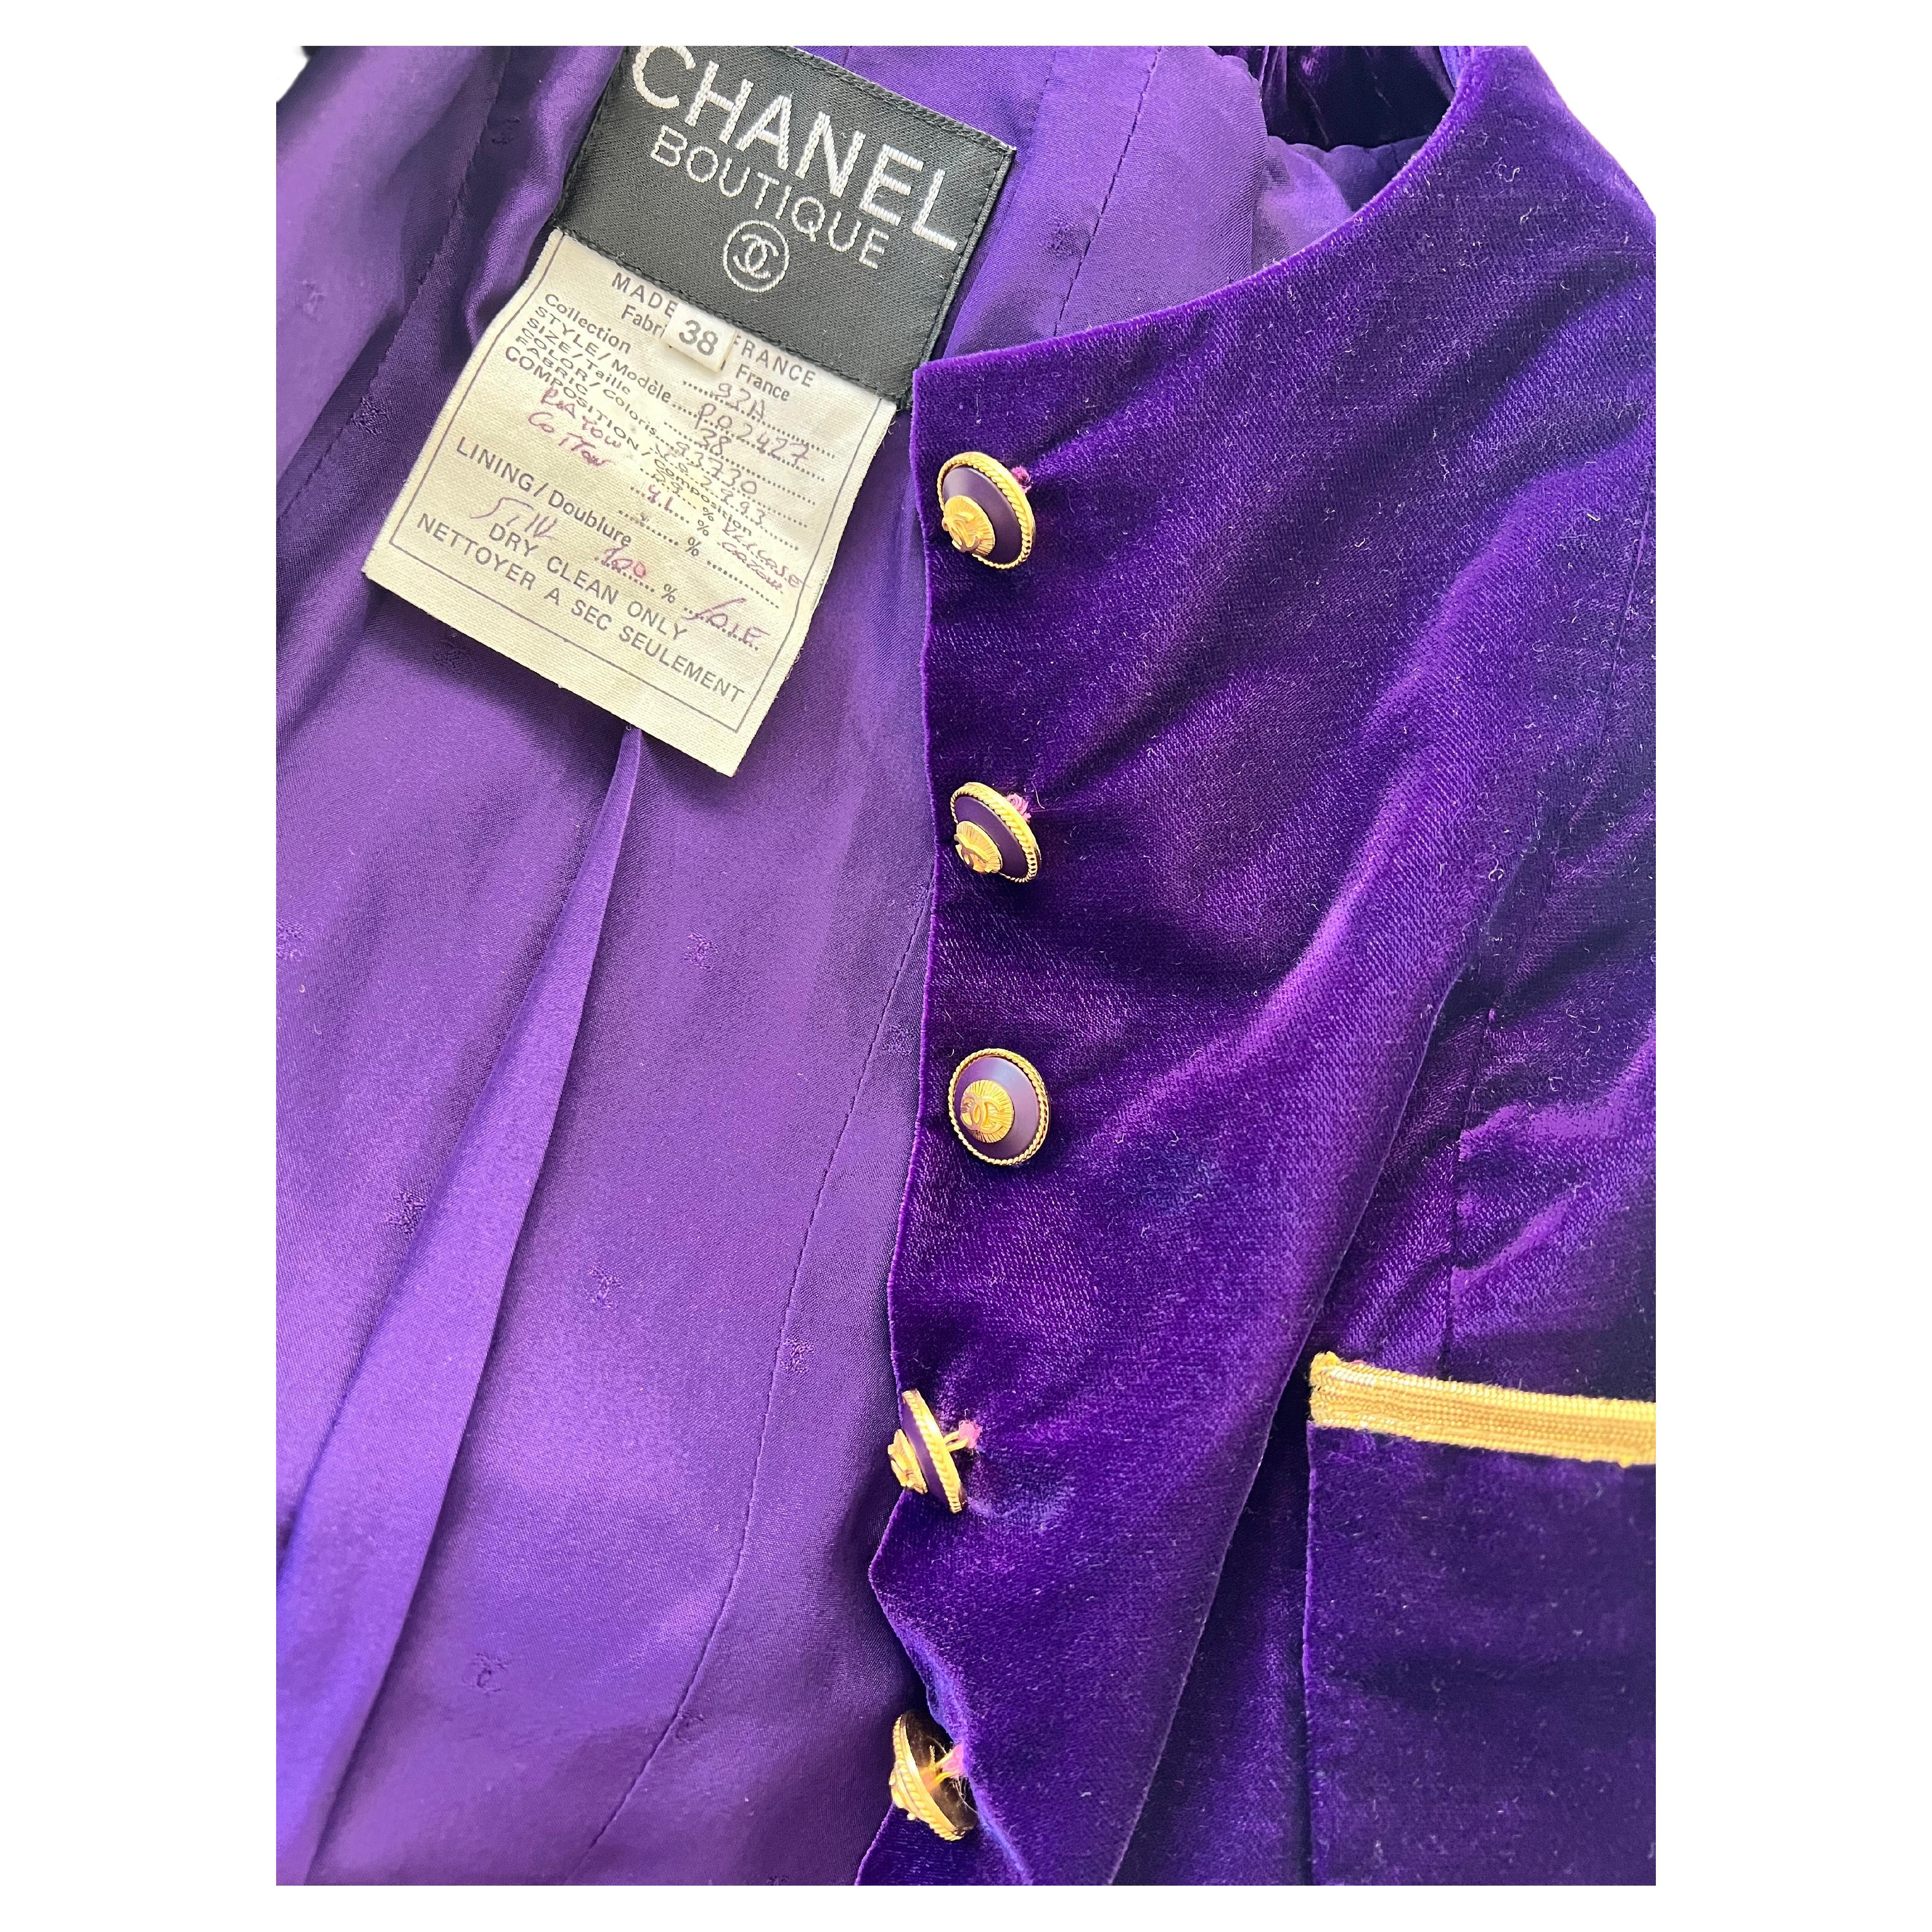 Chanel vintage 90's purple velet jacket with gold trim and Flare in the bottom, Pleats in the back.
excellent condition 

Step out in style with this stunning vintage Chanel 90's purple velvet jacket, complete with exquisite gold trim. This rare